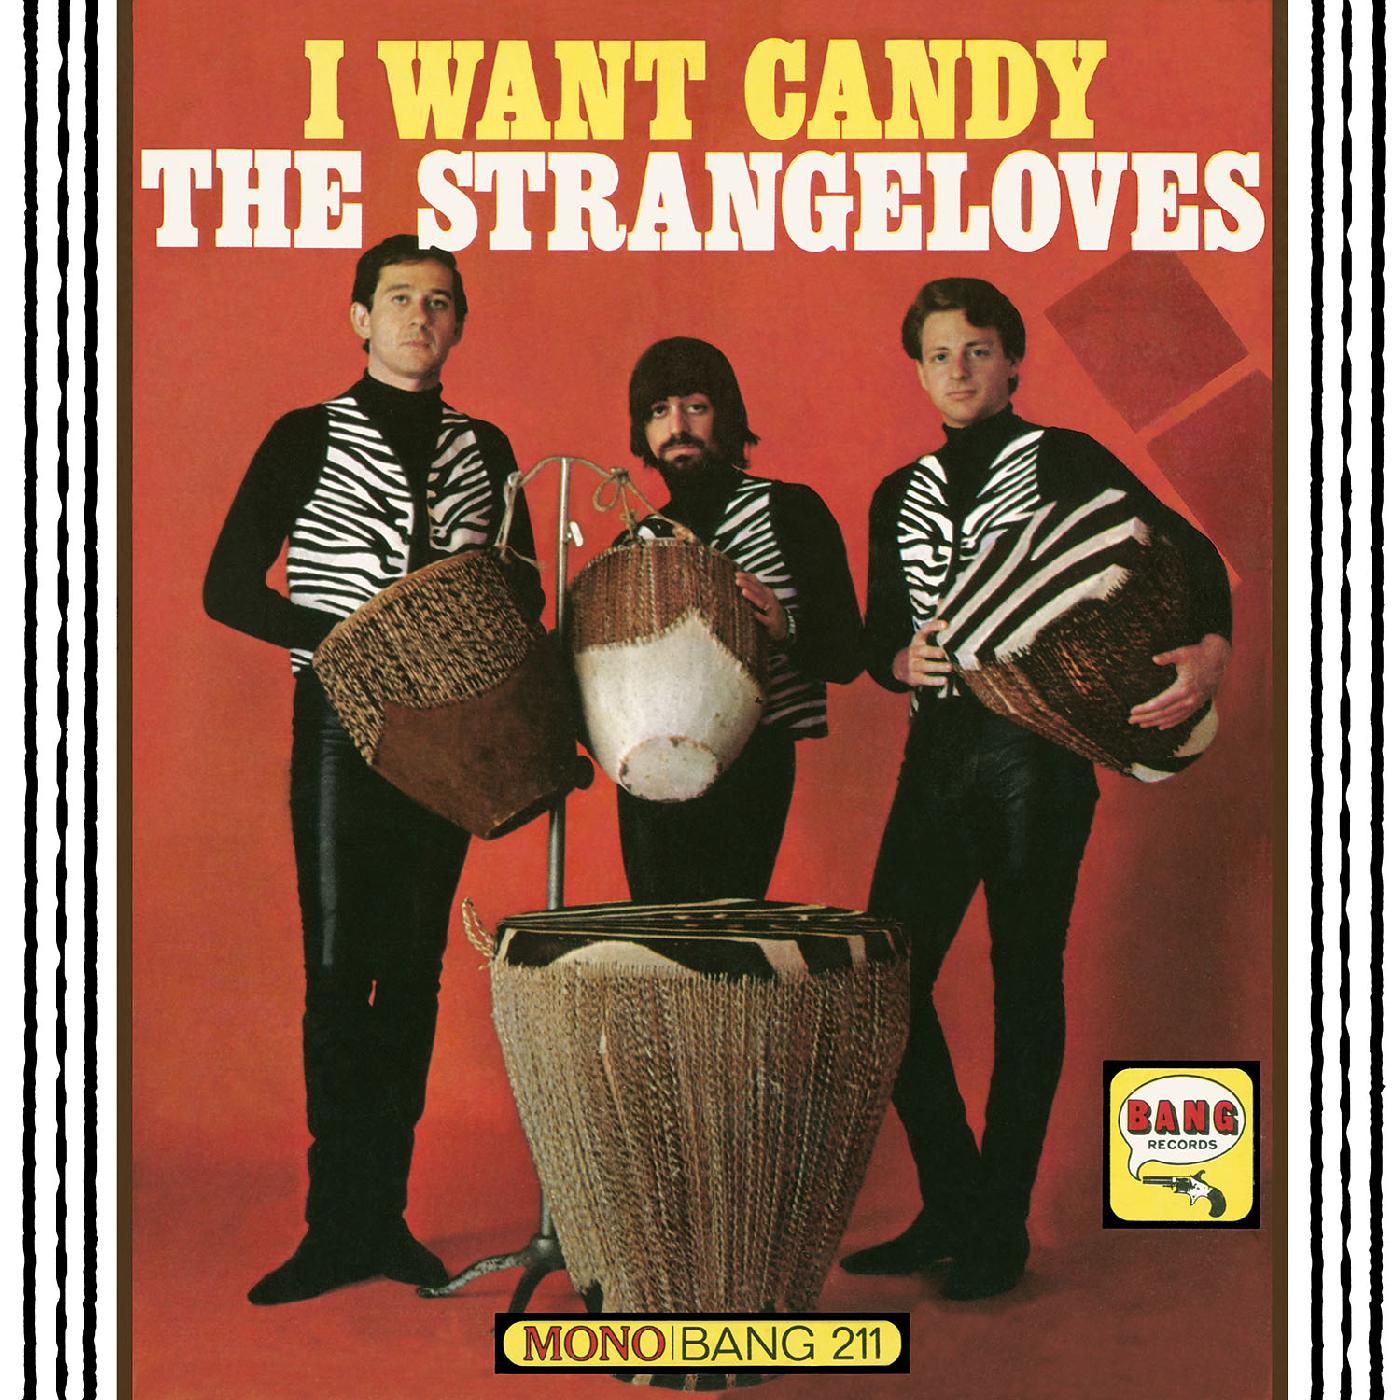 The Strangeloves - I Want Candy - LP